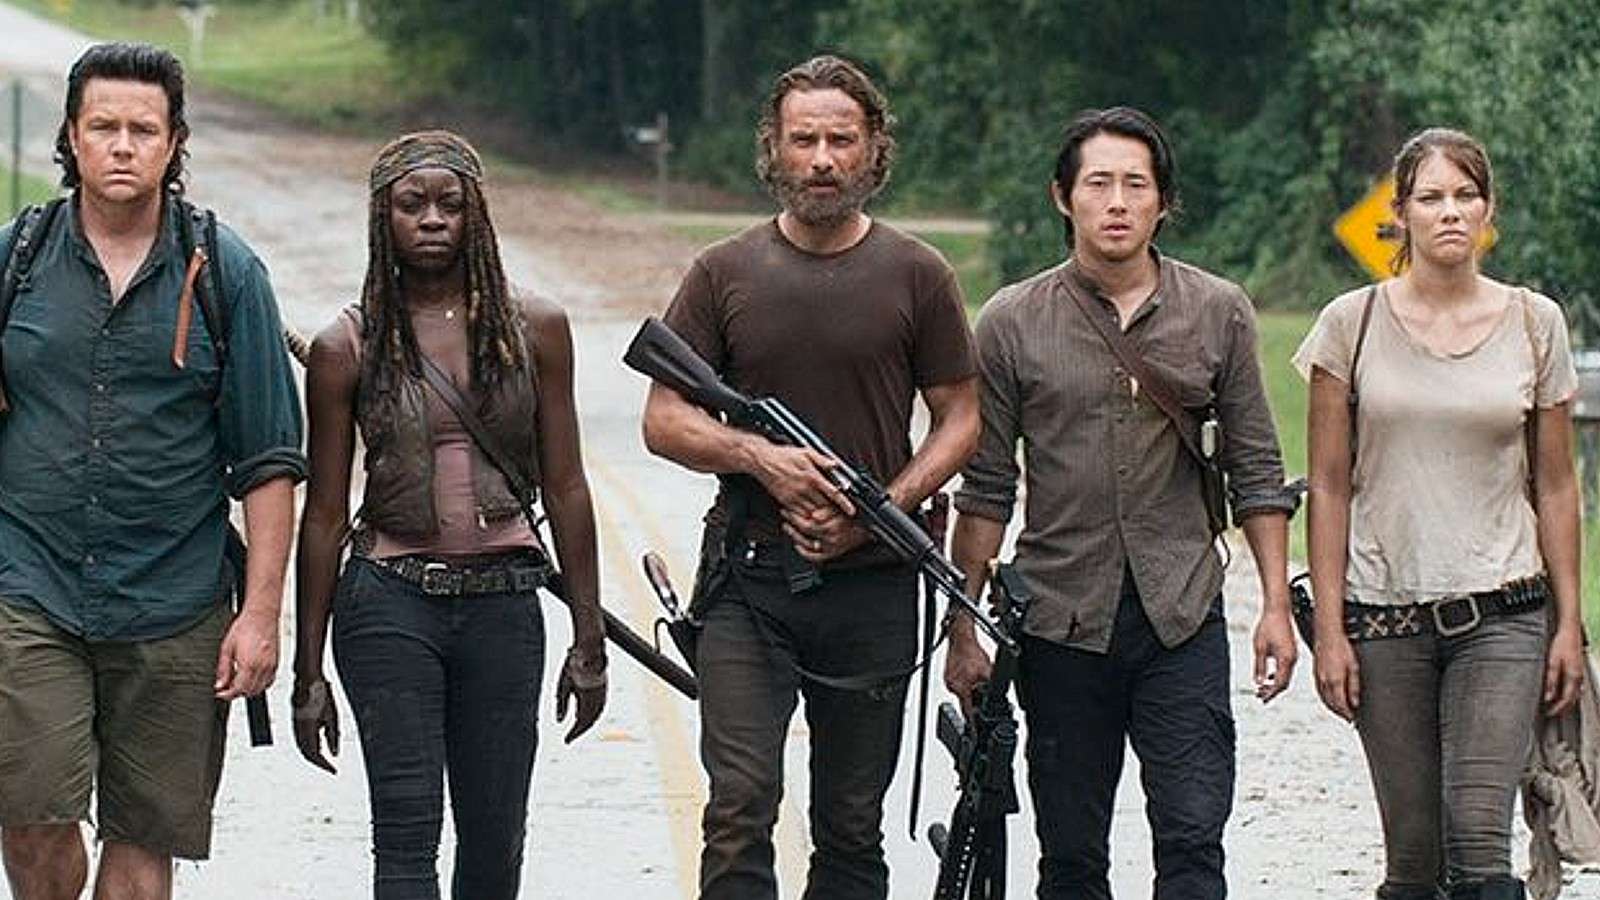 The cast of The Walking Dead